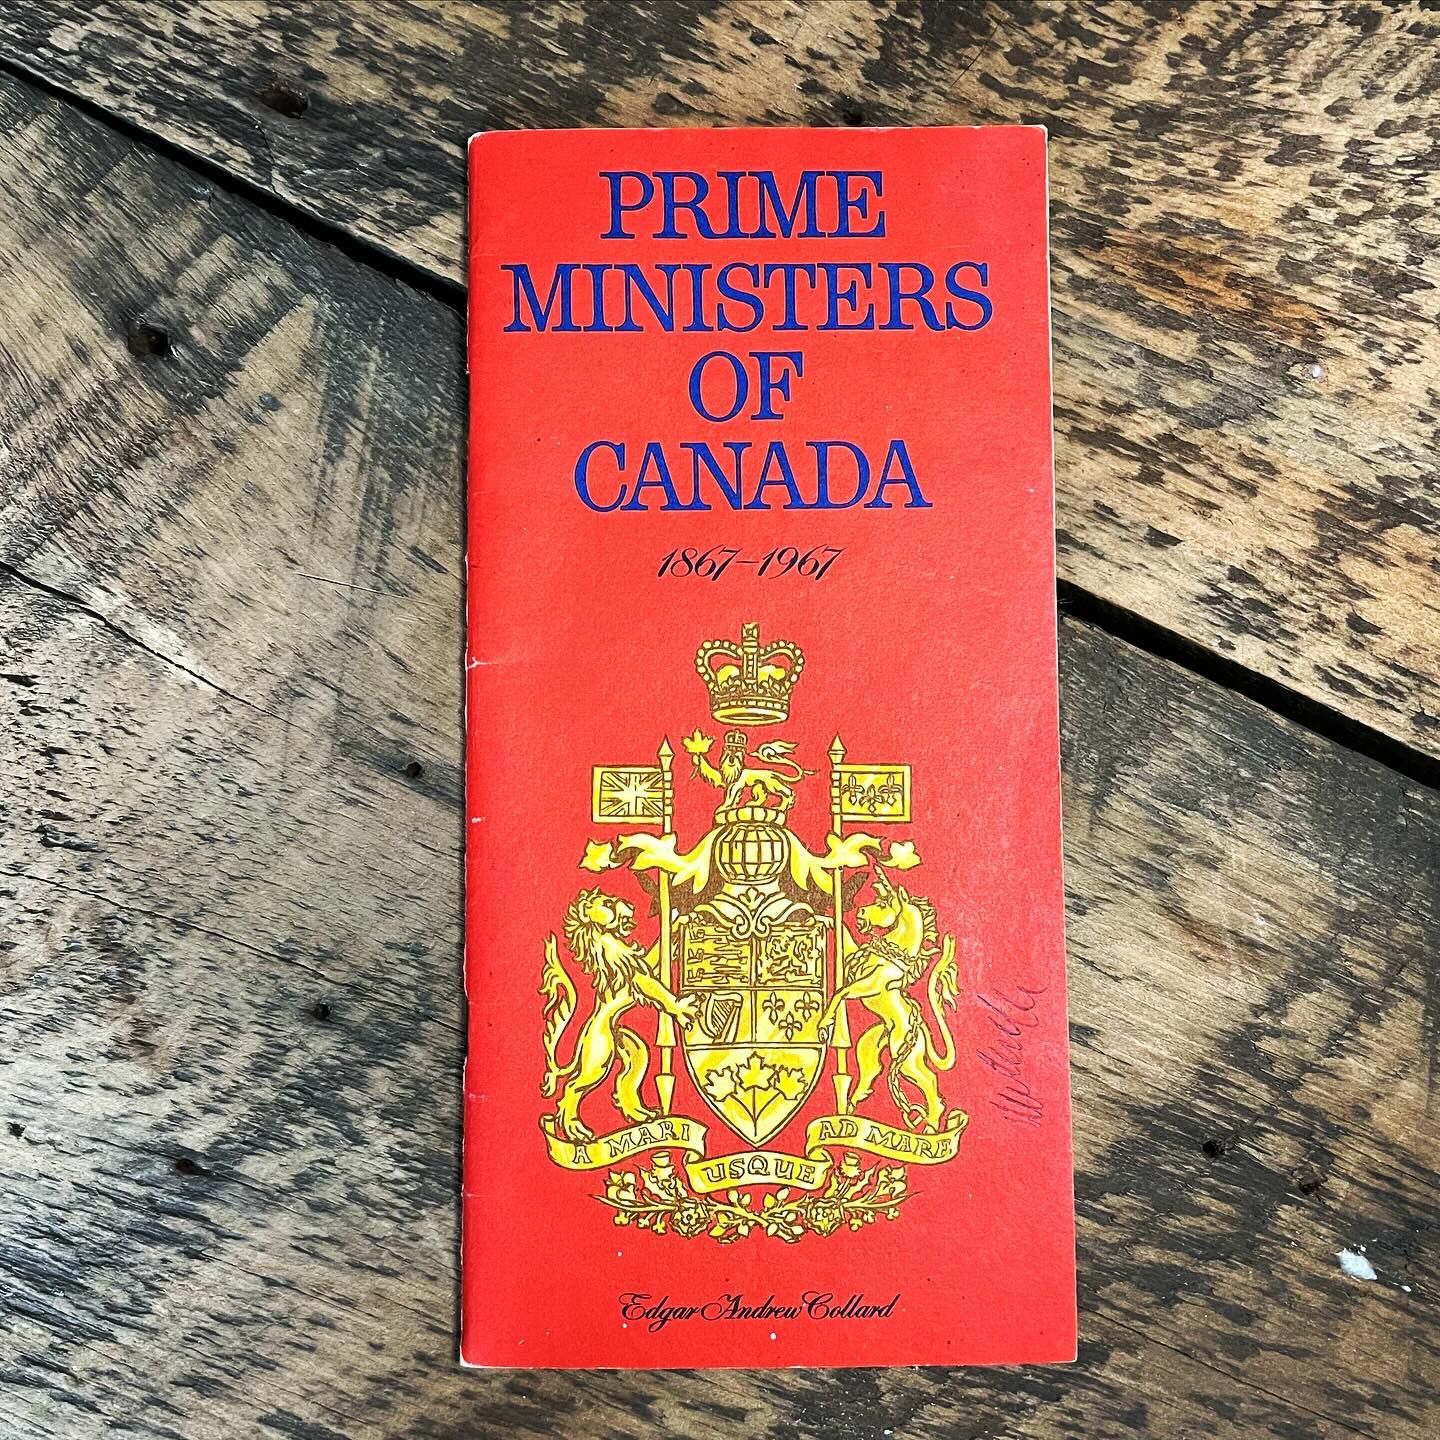 Vintage Prime Ministers of Canada Booklet